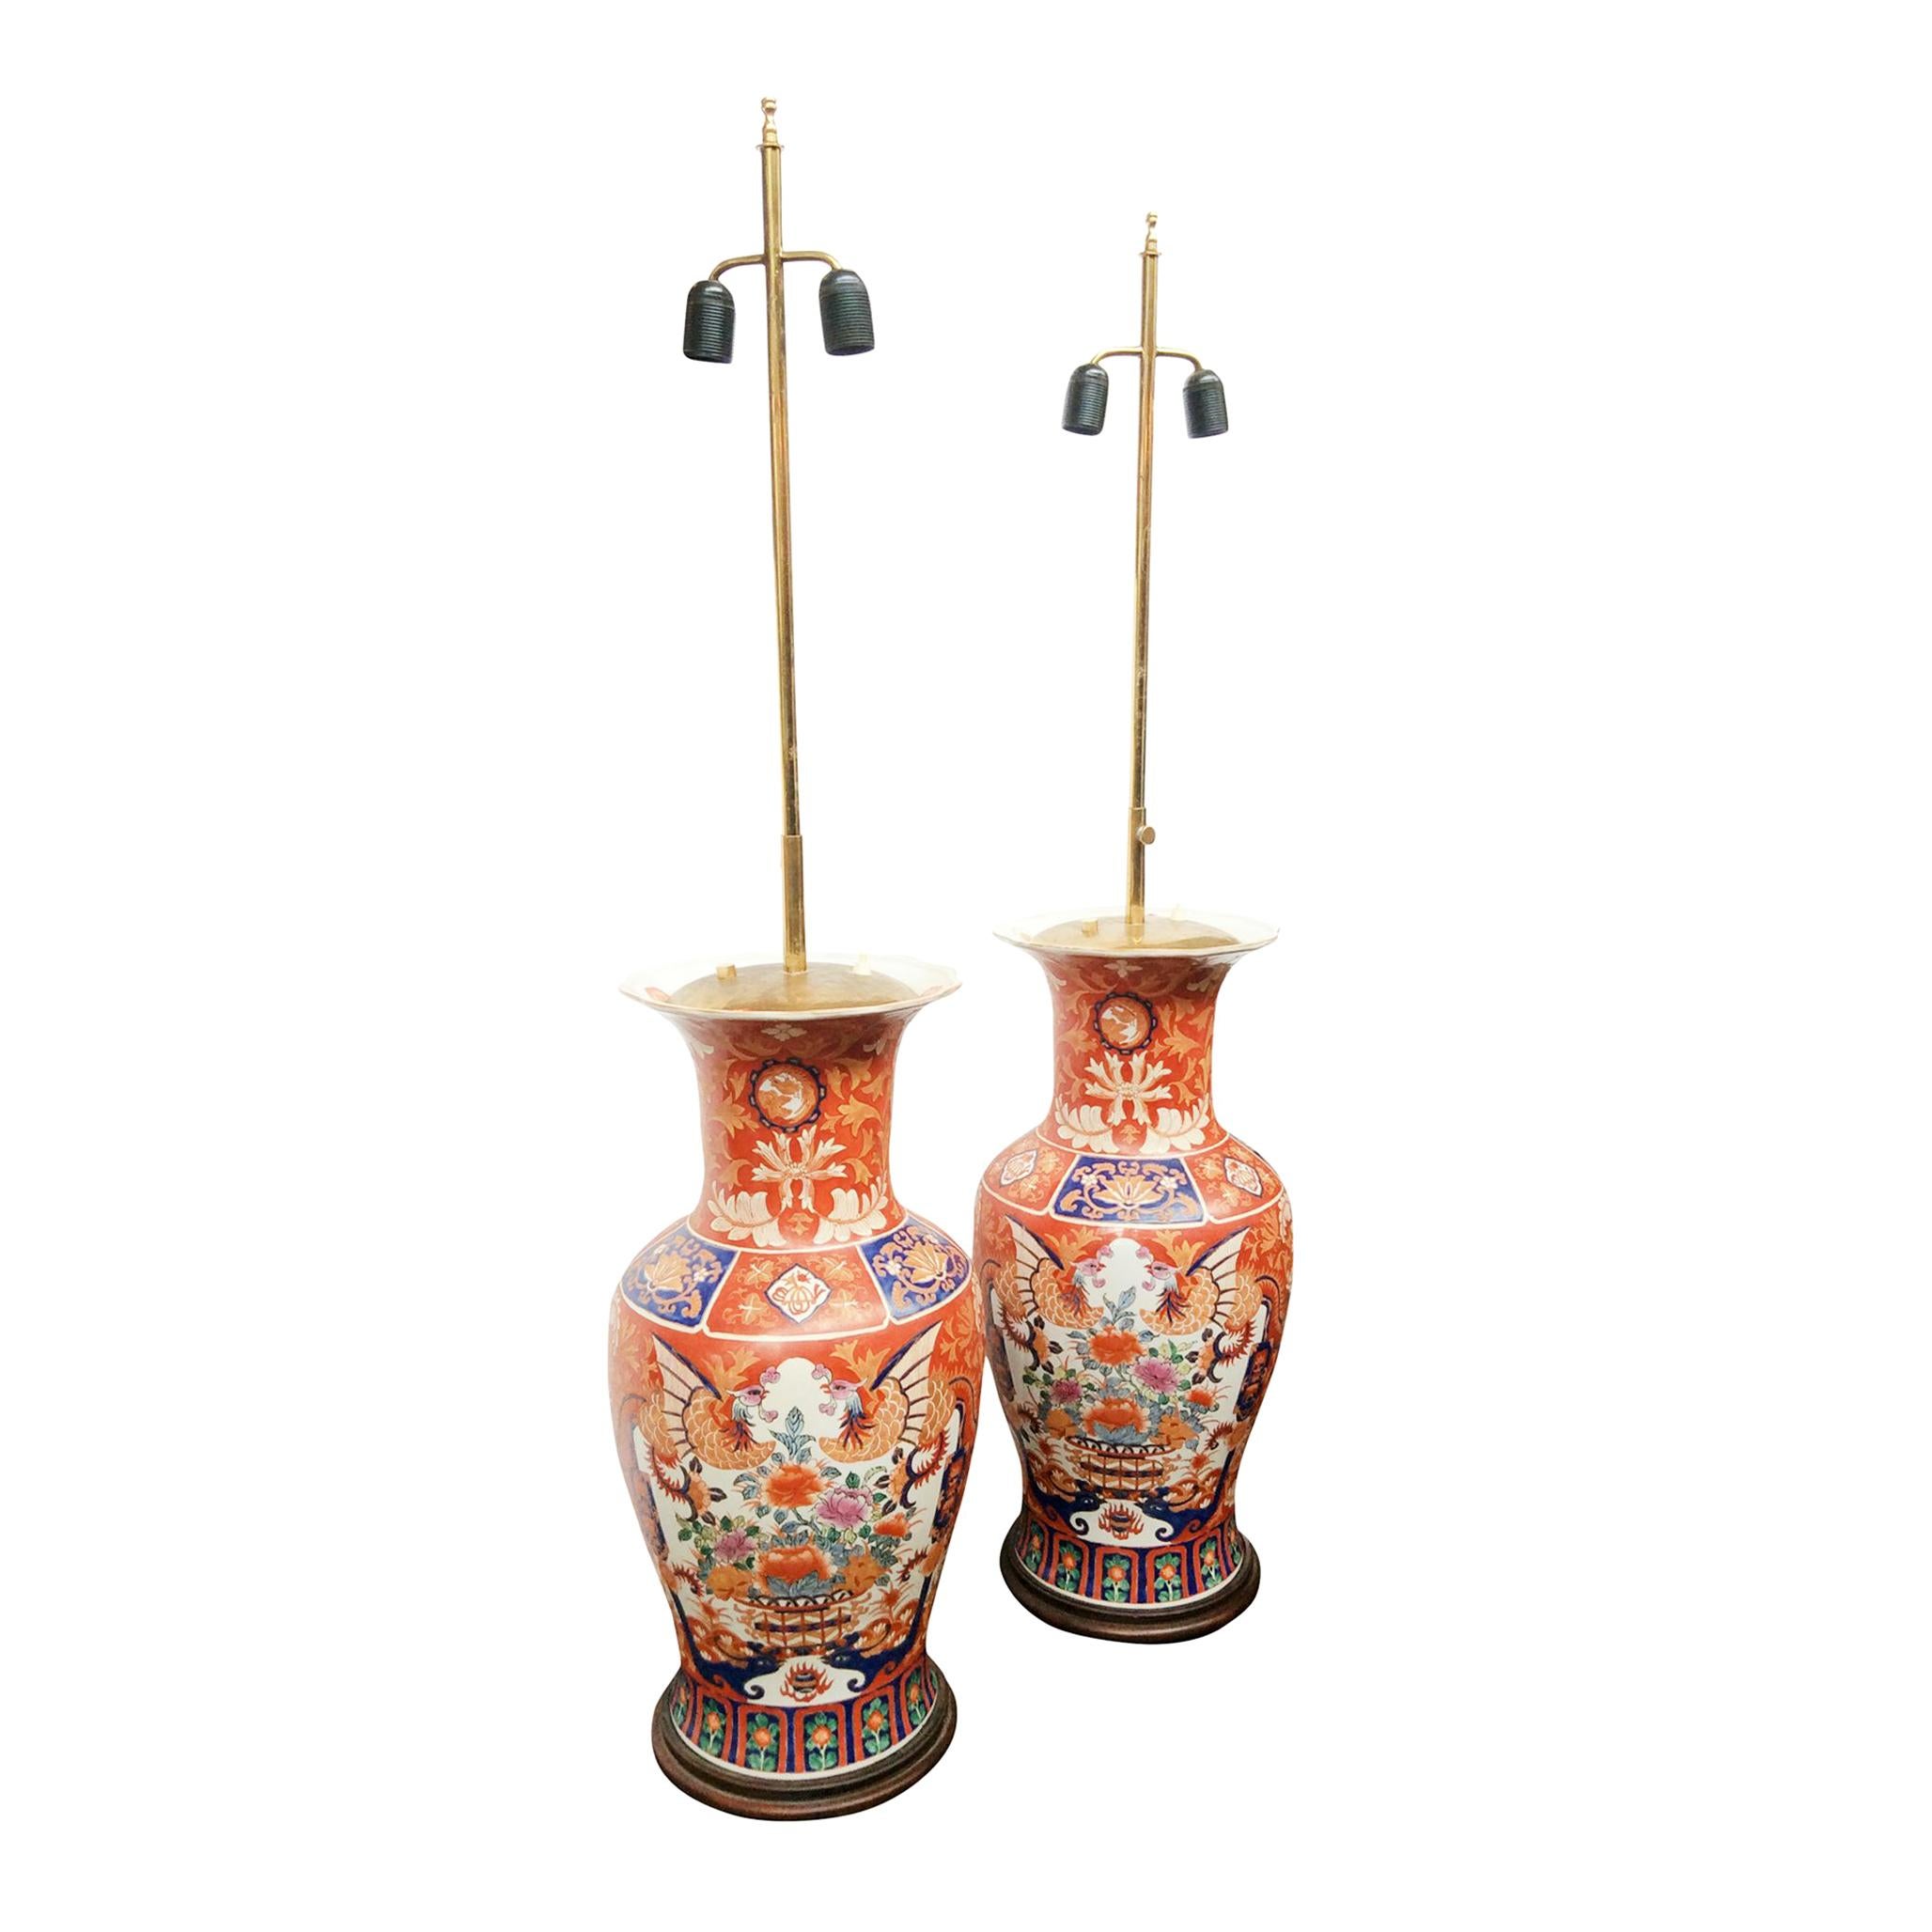 An exceptional pair of Imari table lamps. Handcrafted in the 1940s. Influenced by the bold colors of Arati ware from Japan. This pair is comprised of hand painted ceramic vase bodies decorated in a palette of red, yellow, orange, white, blue, and